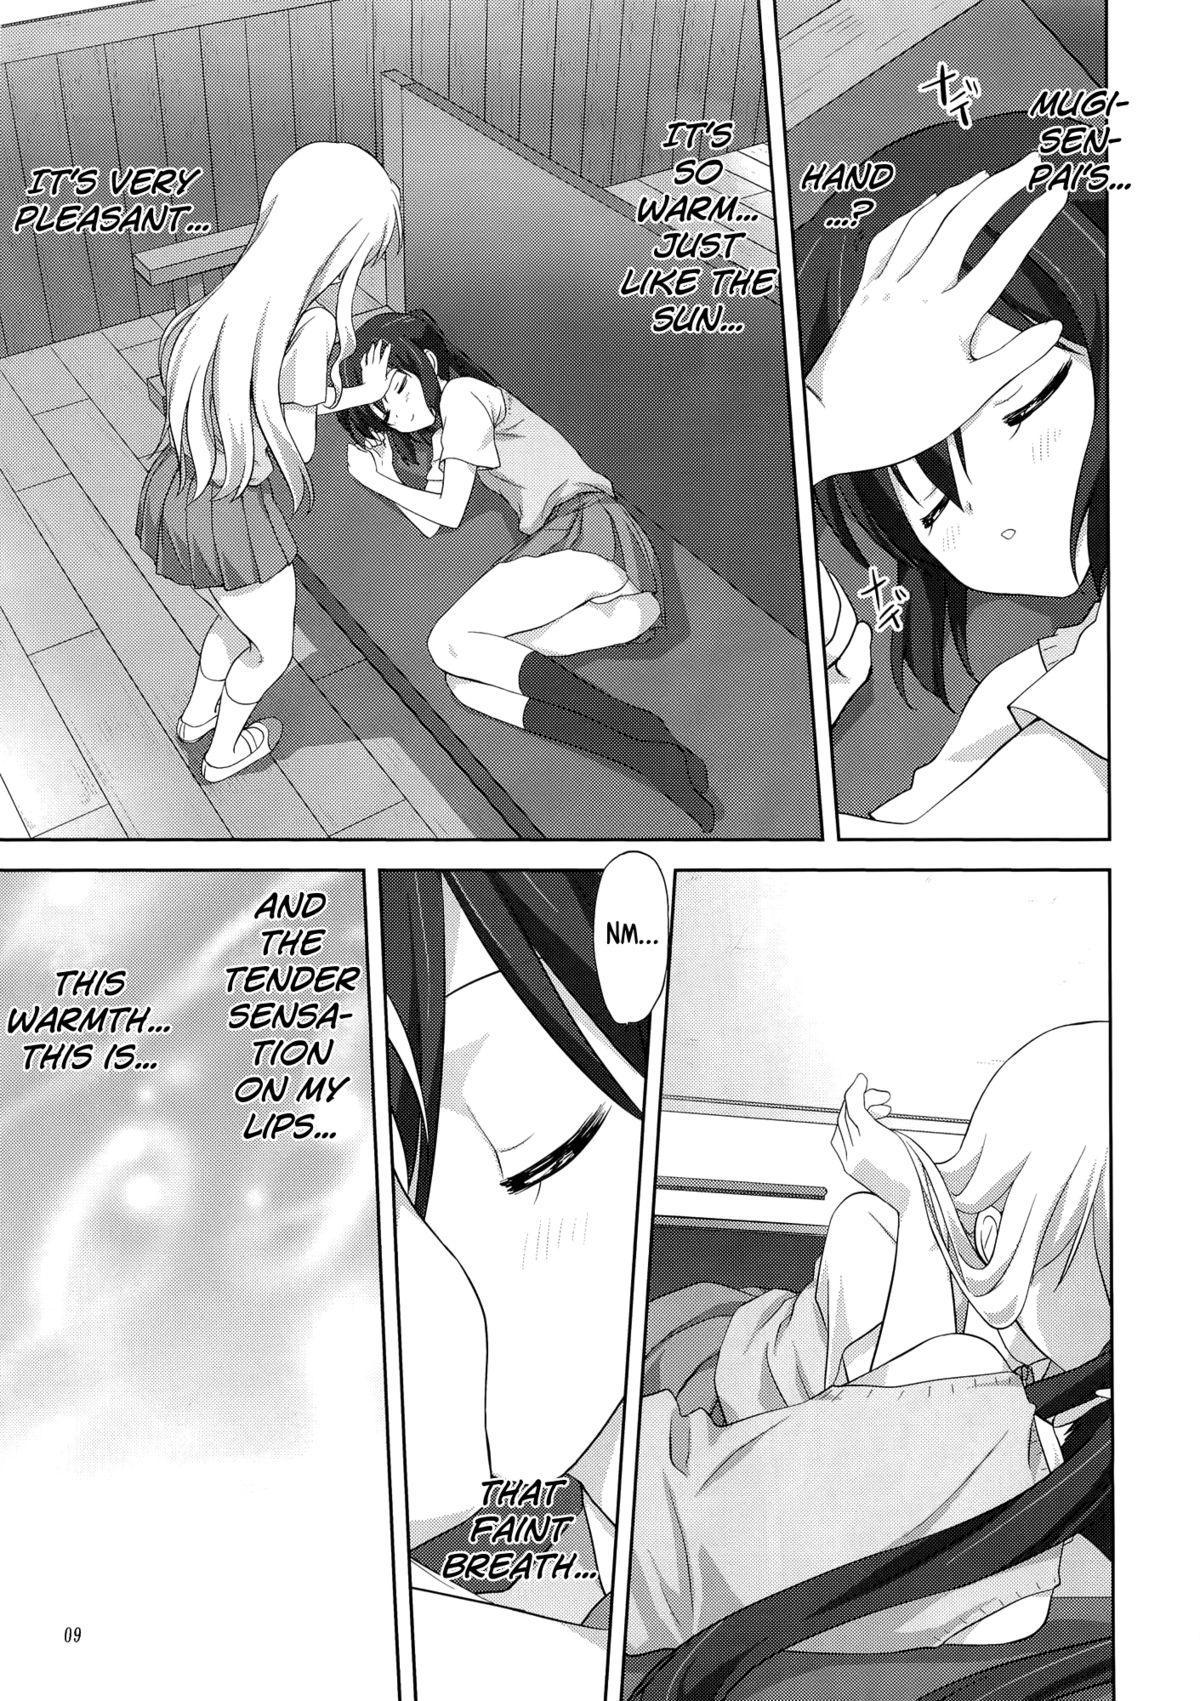 Action Mugi to Azu Zenpen - K on With - Page 8